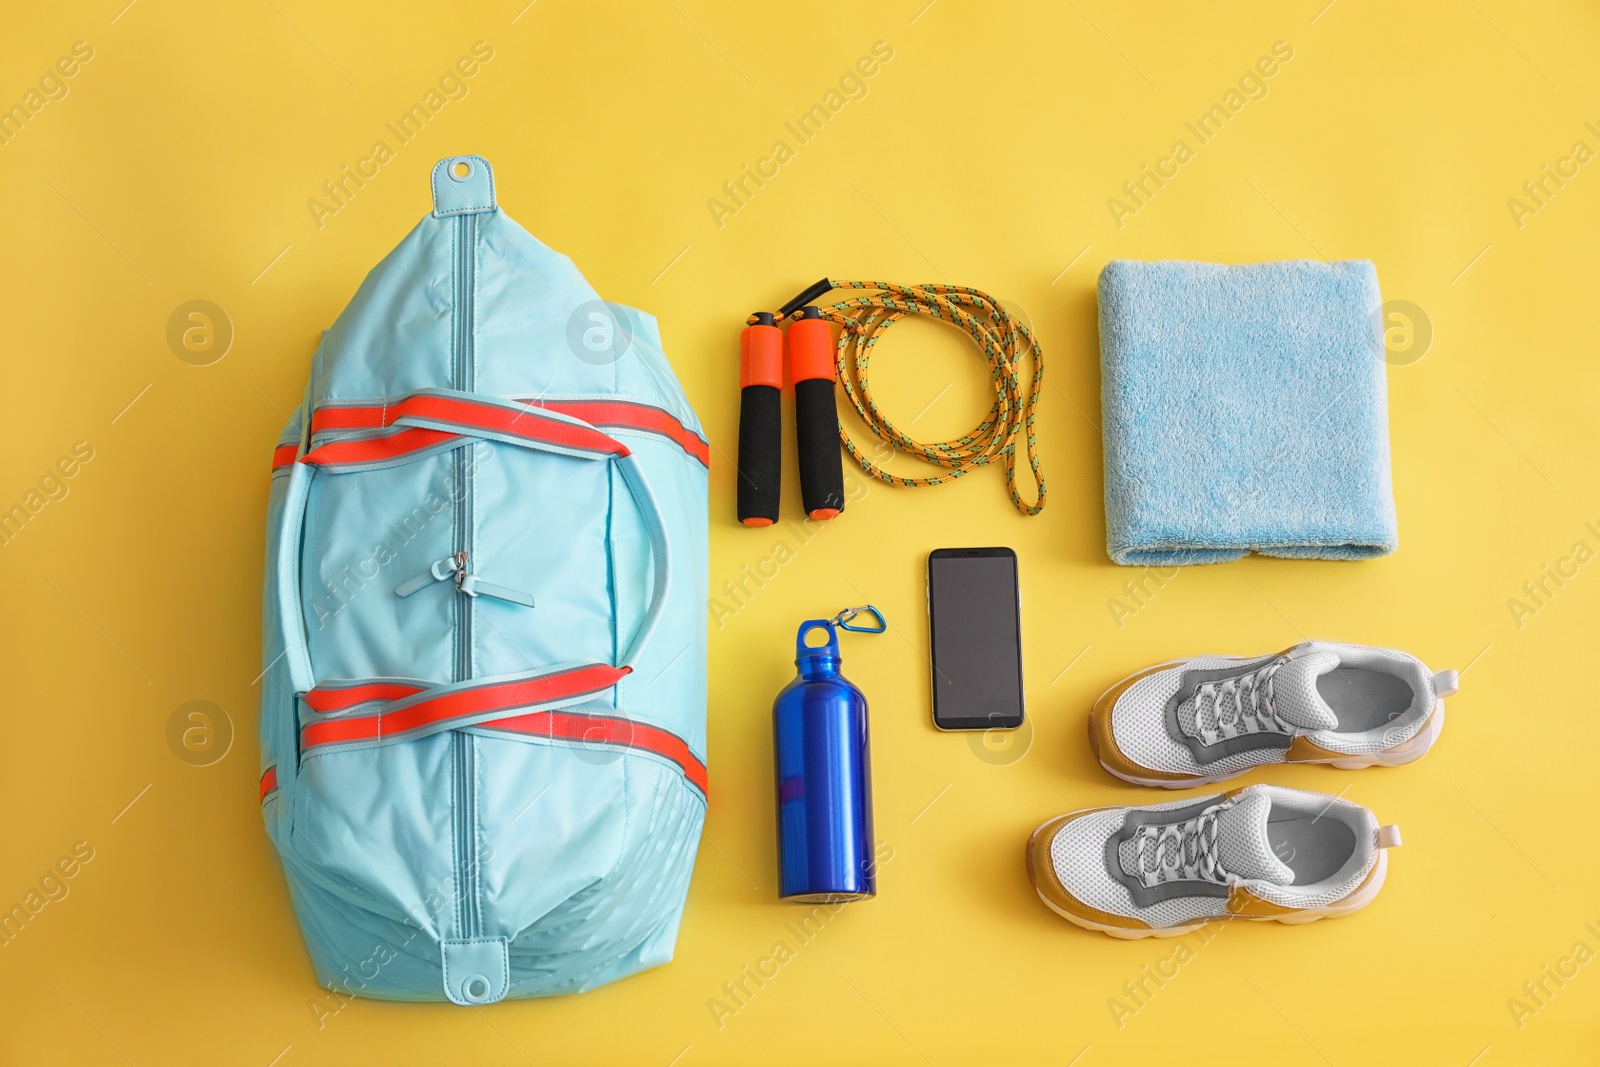 Photo of Gym bag, smartphone and sports equipment on yellow background, flat lay